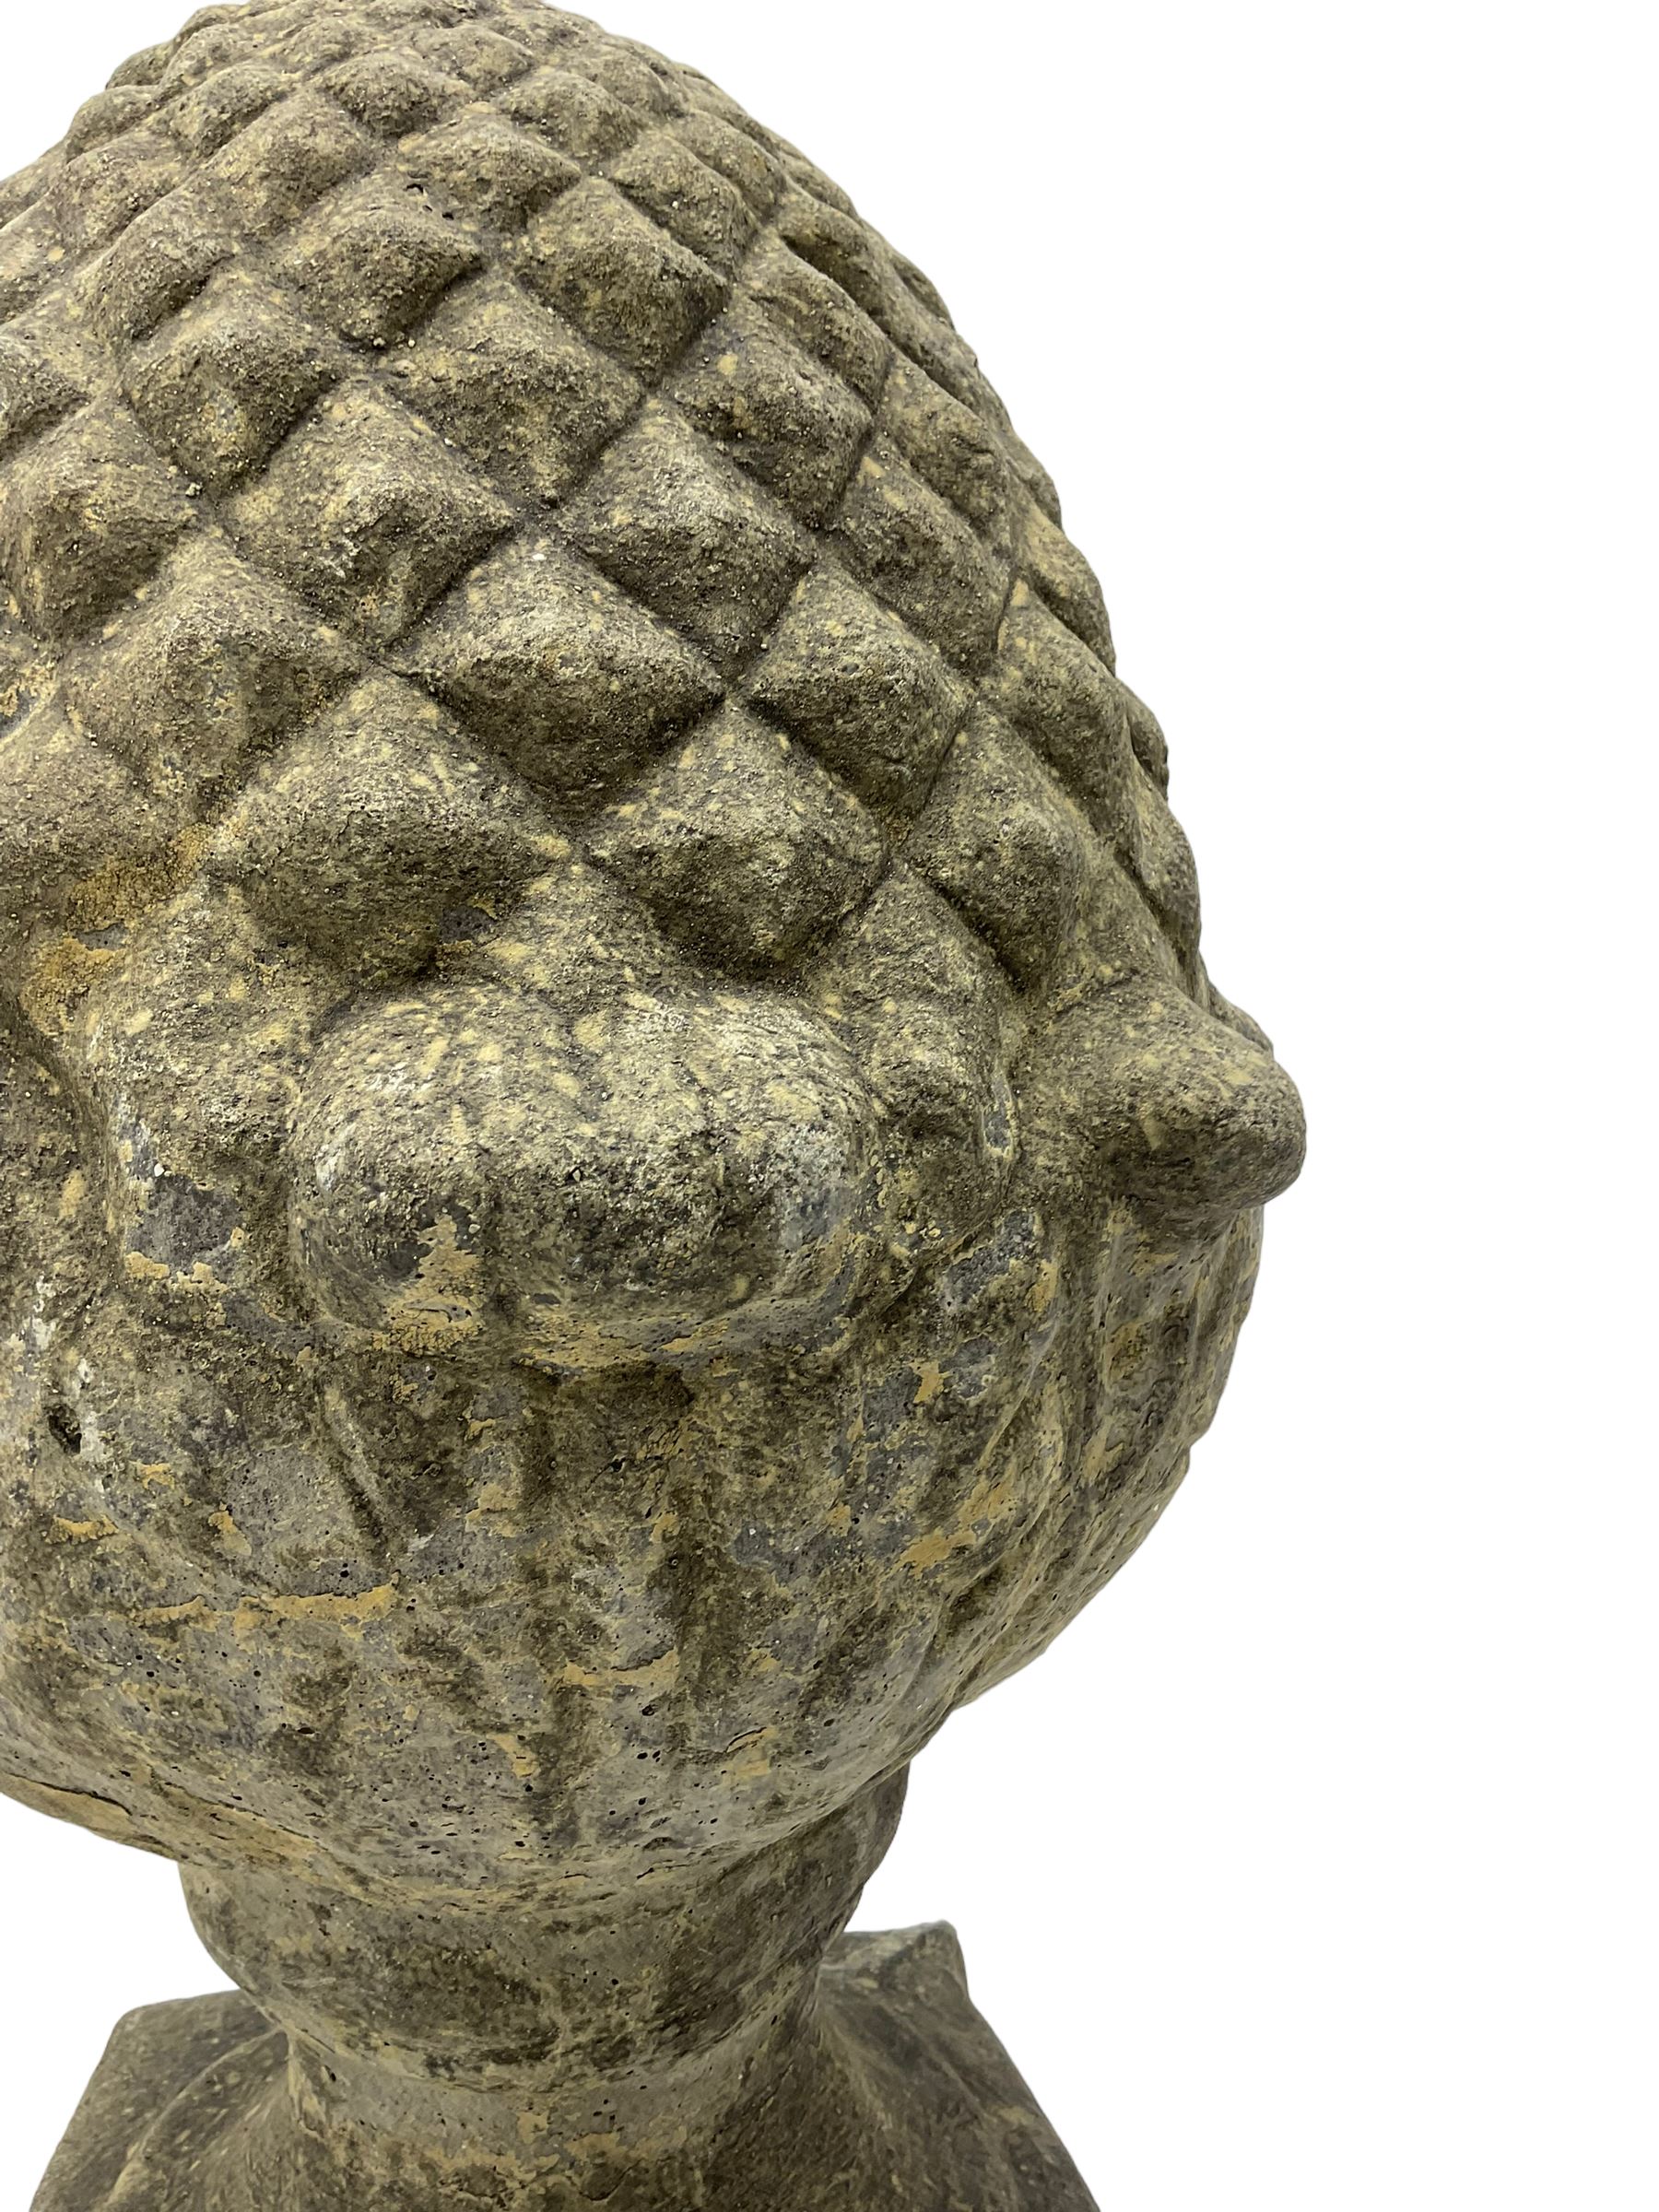 Pair of cast stone garden pineapples gatepost finials - Image 5 of 5